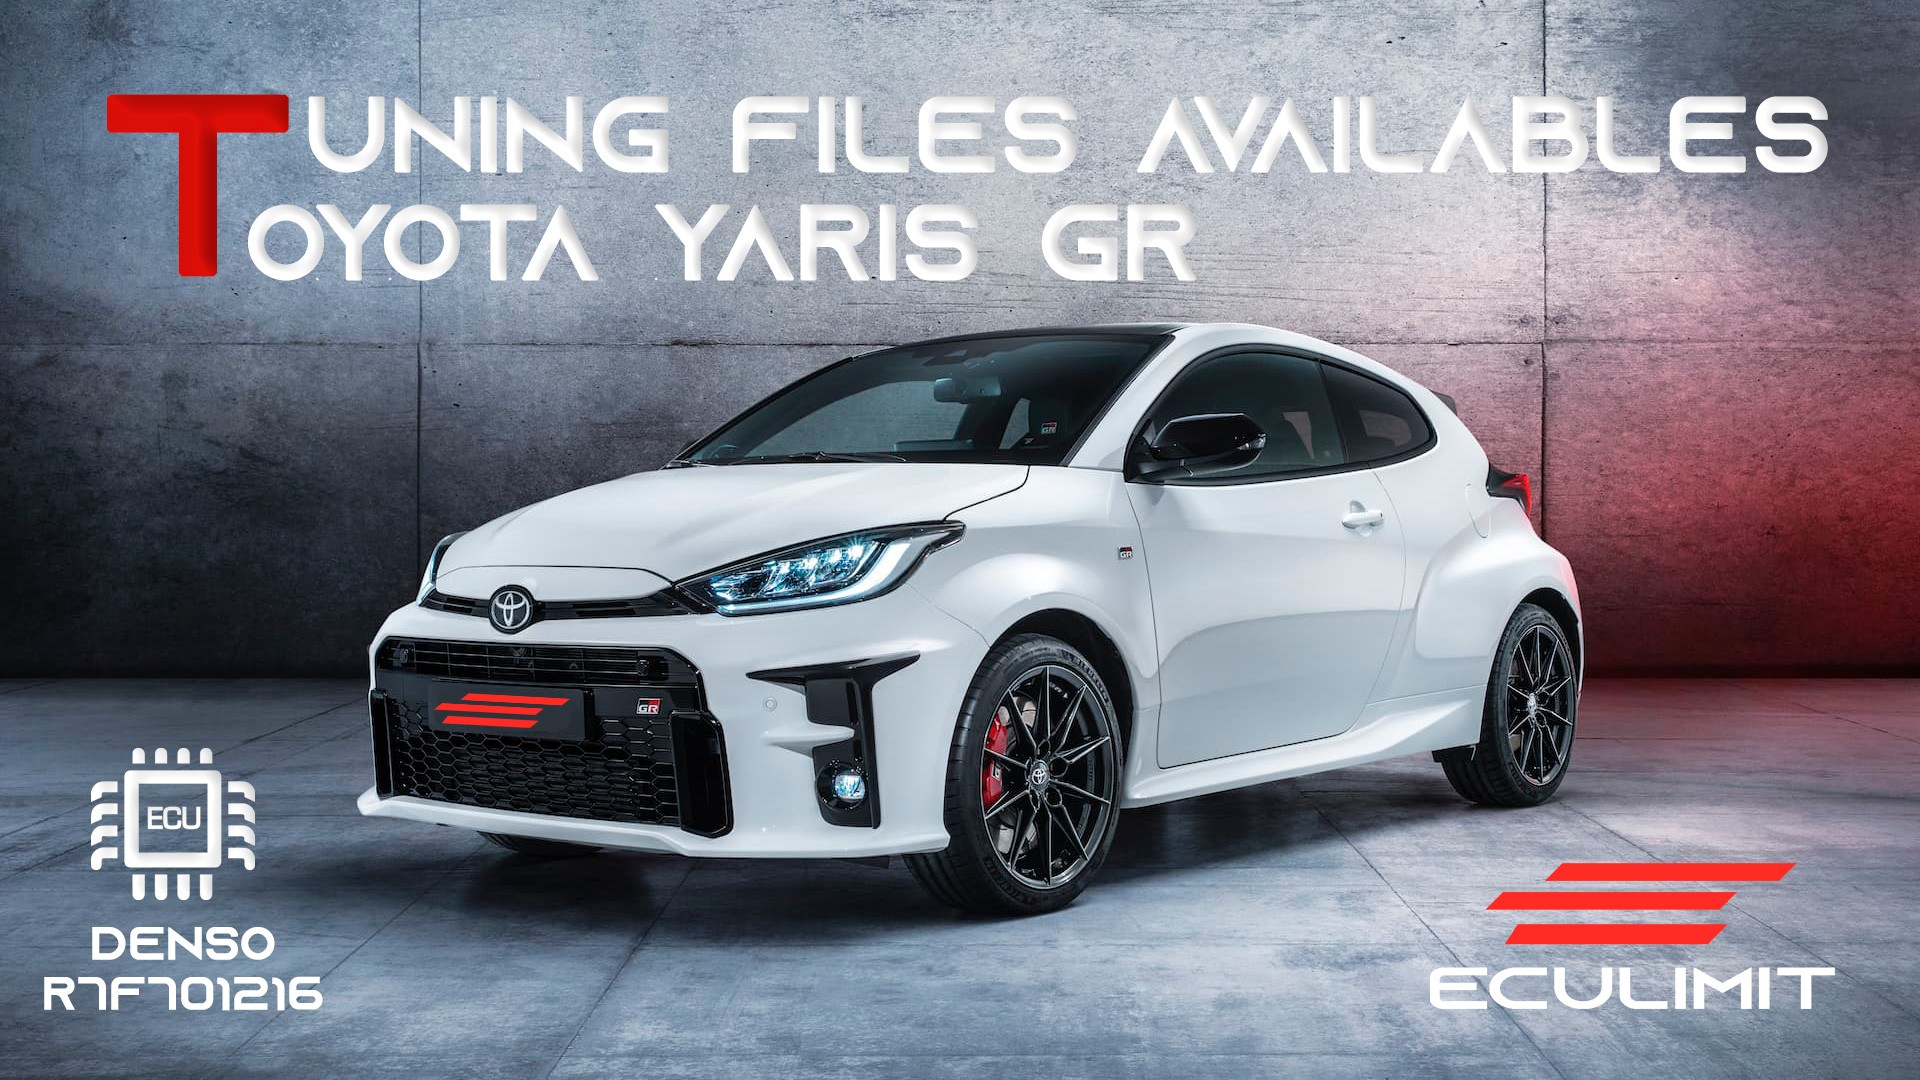 TOYOTA YARIS GR – Tuning files availables